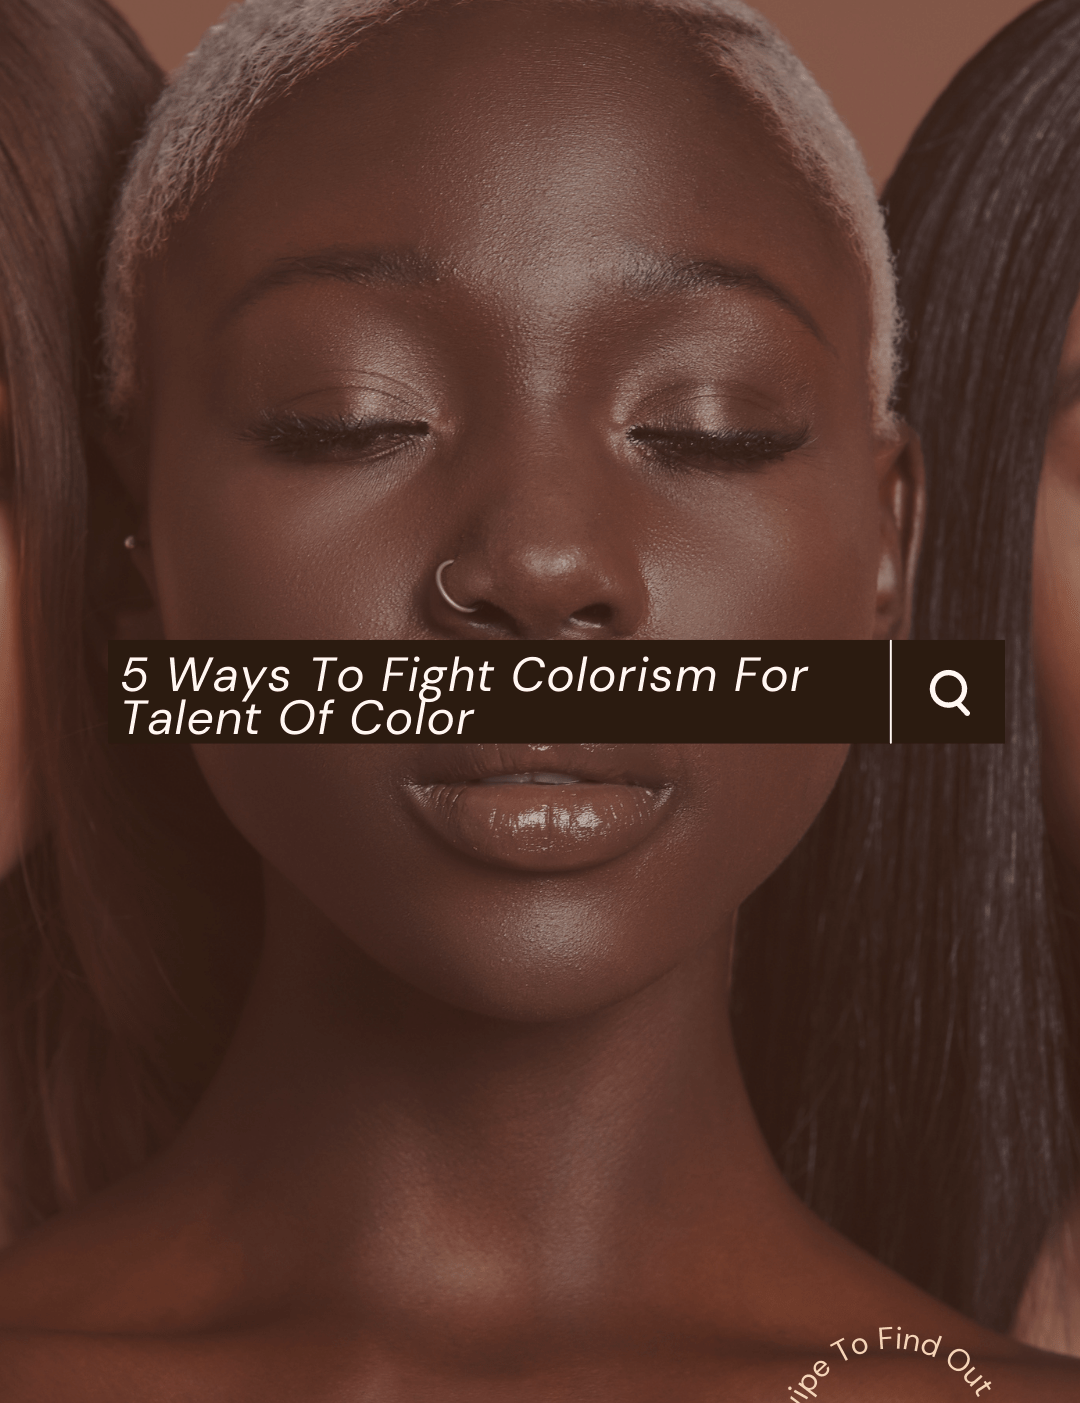 A photo of a dark skin model with a text box over her face about colorism.